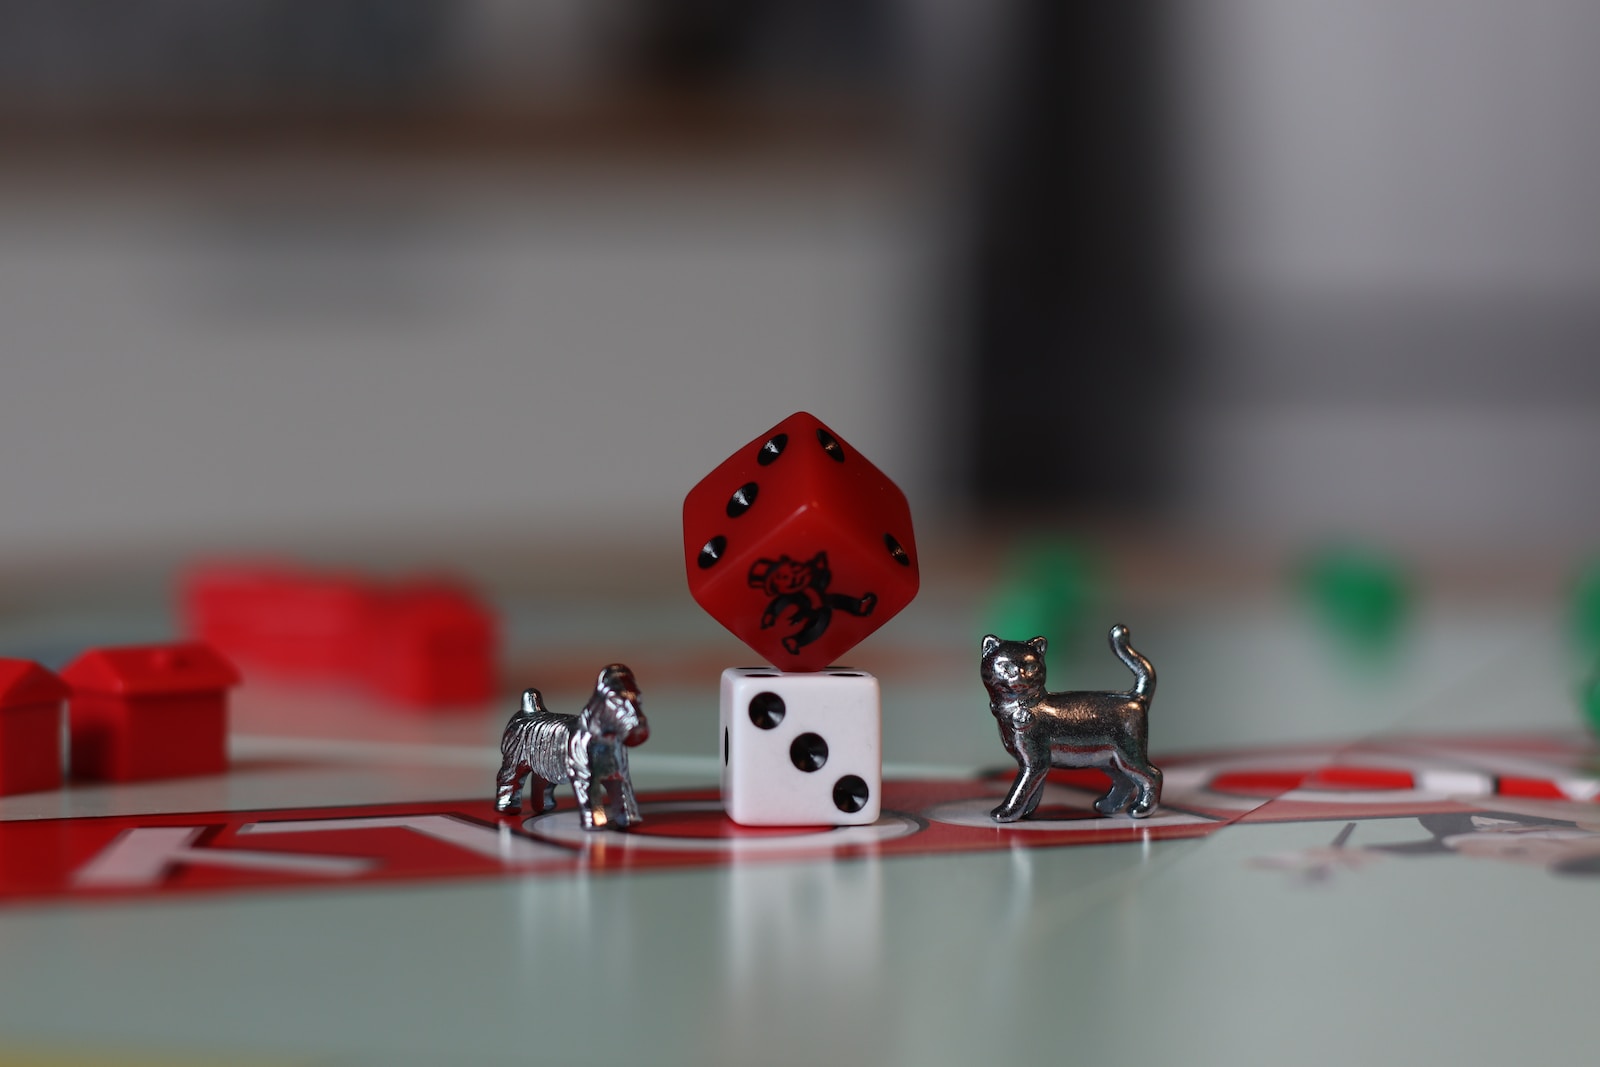 red and silver dice on red table